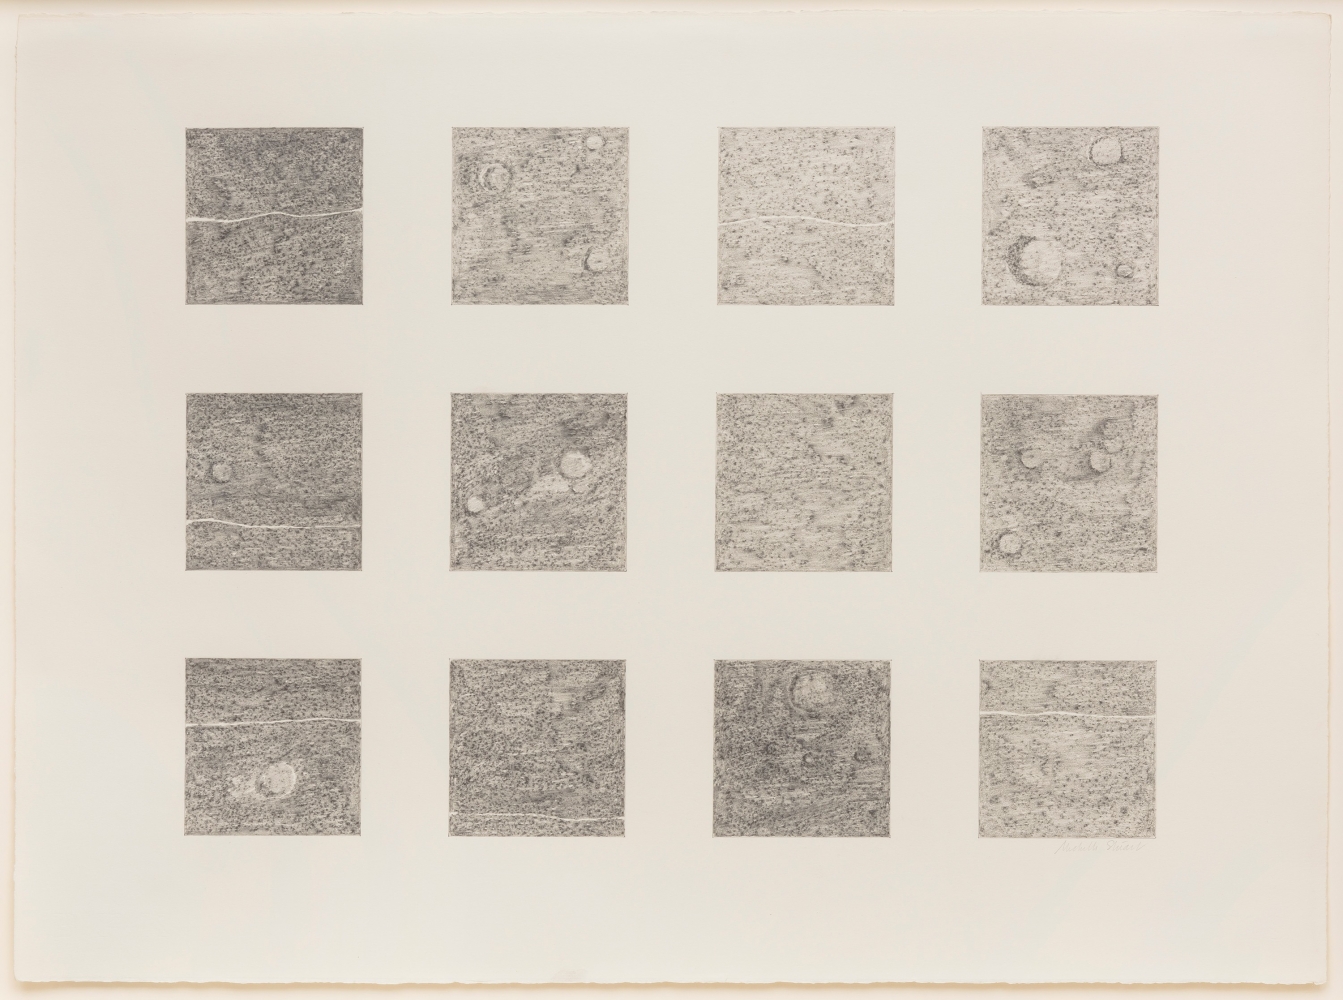 Scanning Sequence, 1969, Graphite on Rives paper